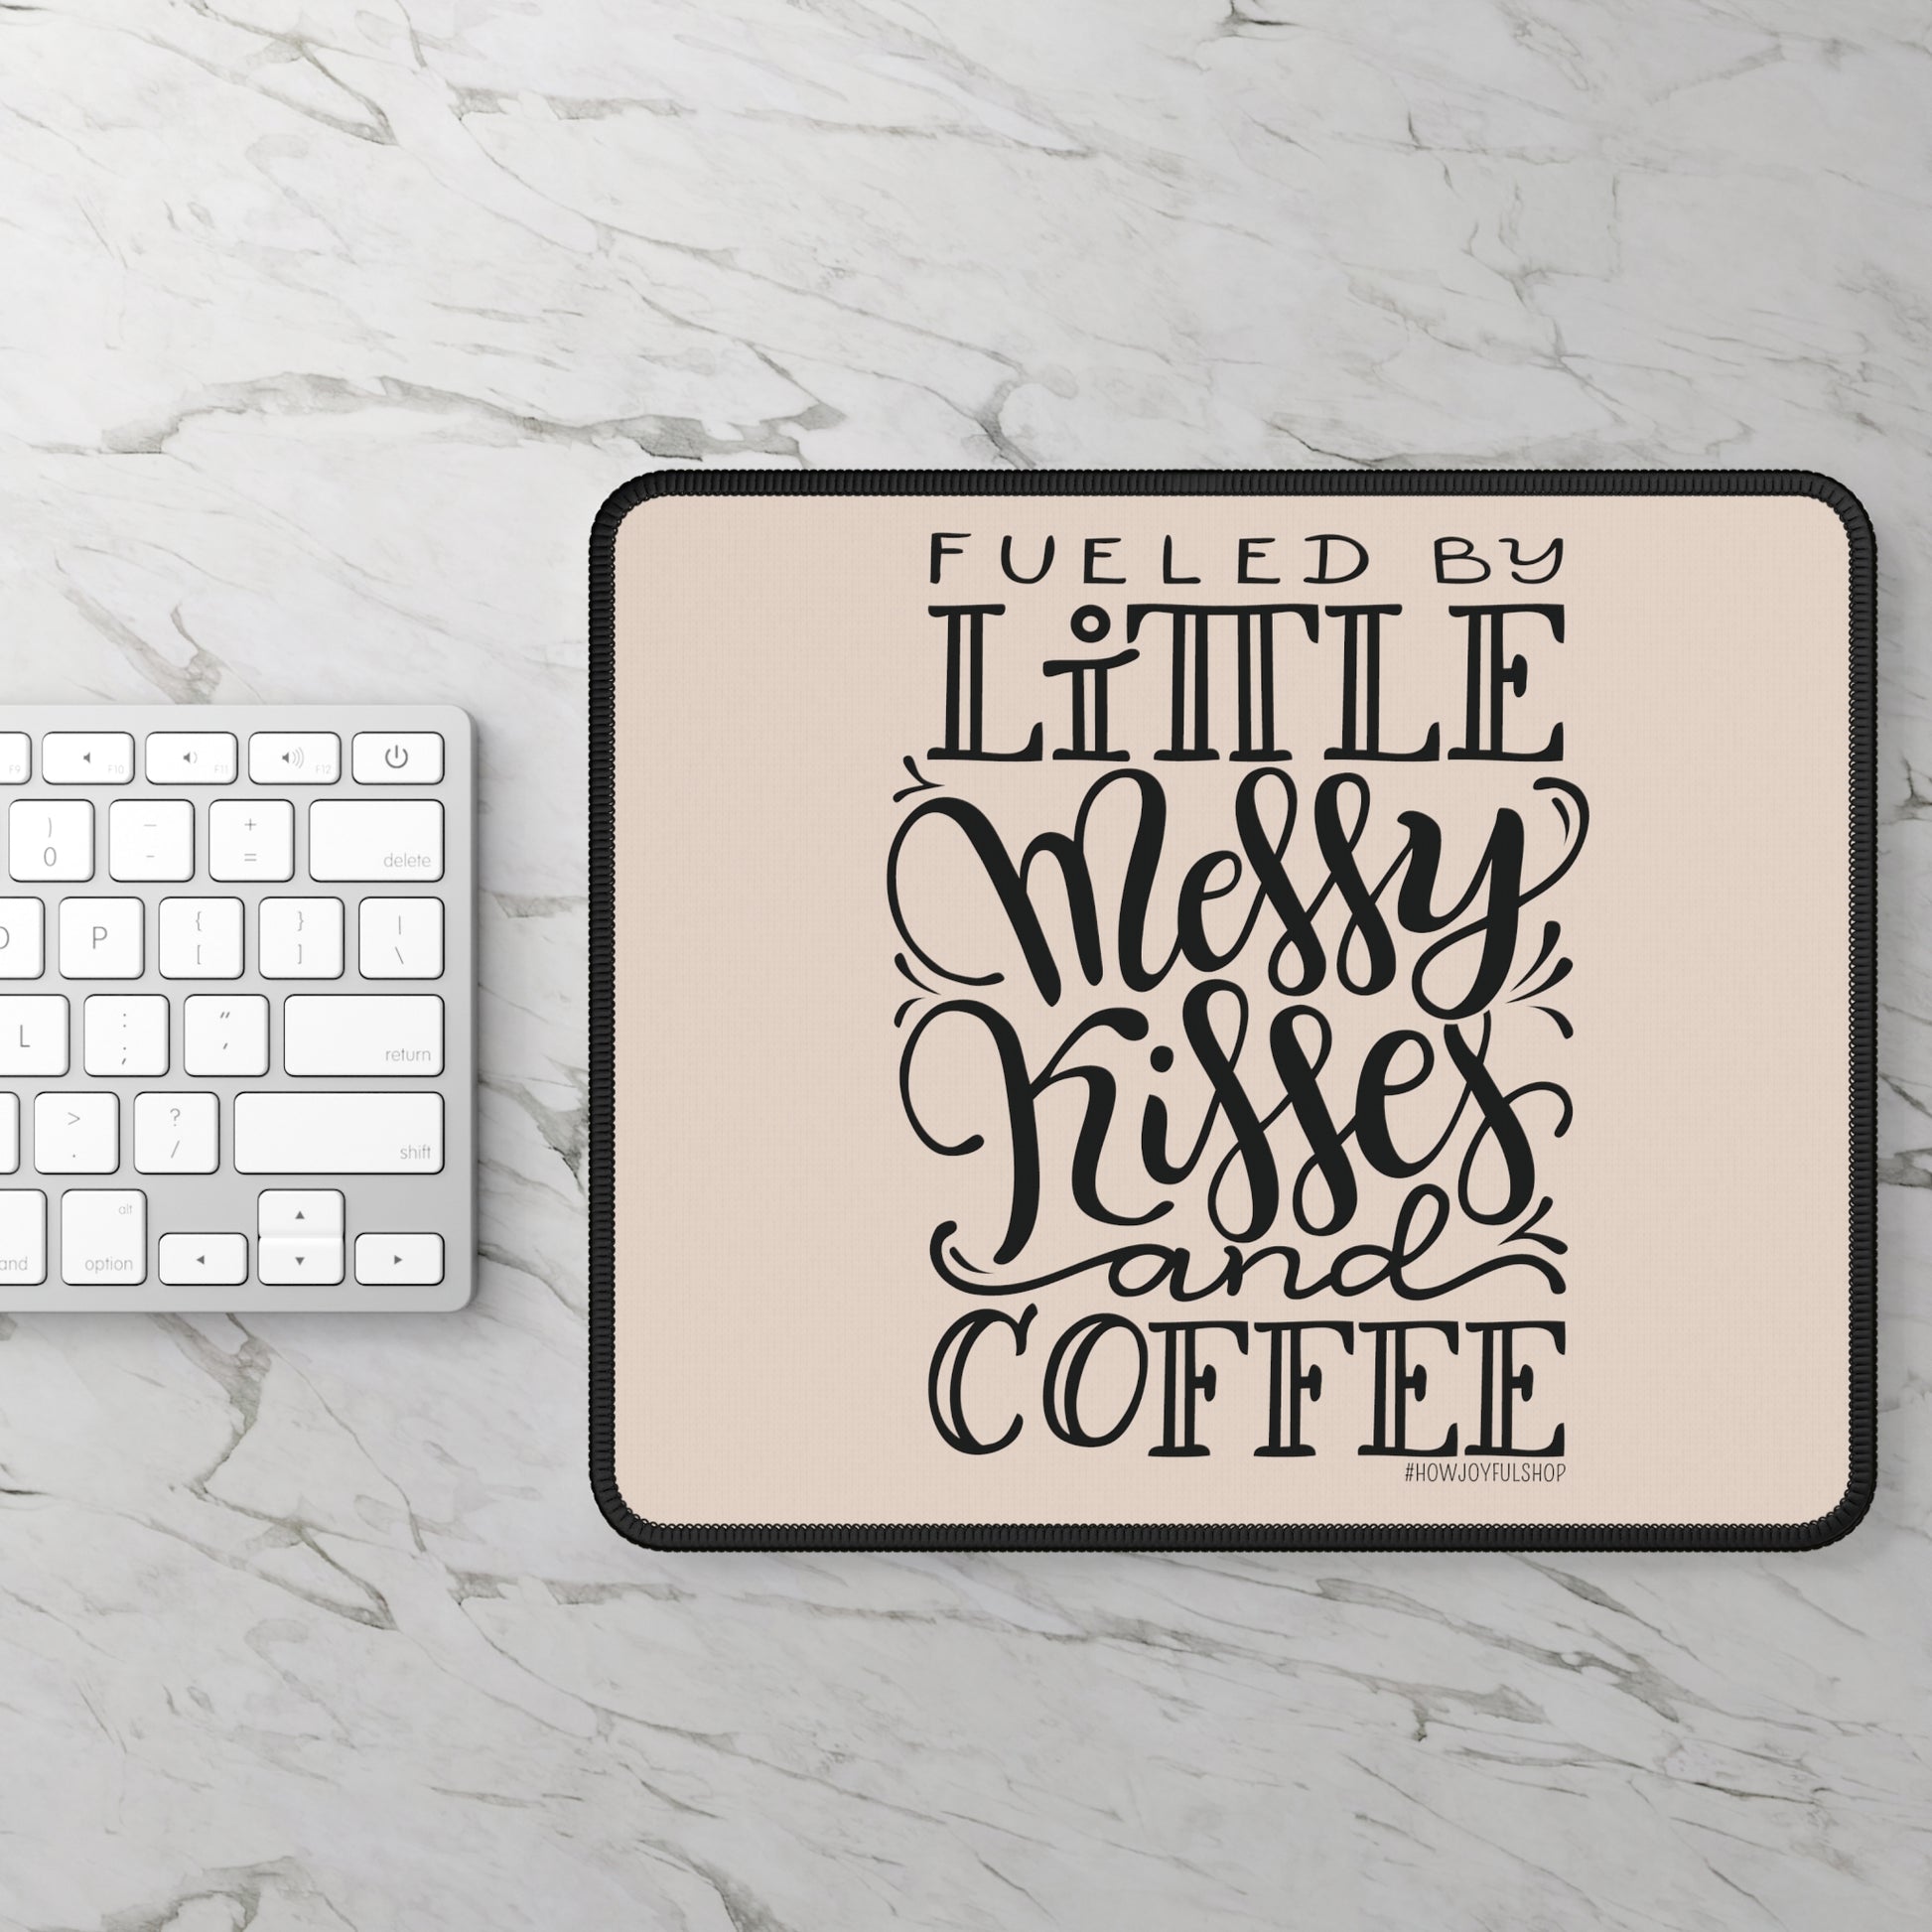 Fueled by messy kisses and coffee - Tan Mousepad - howjoyfulshop